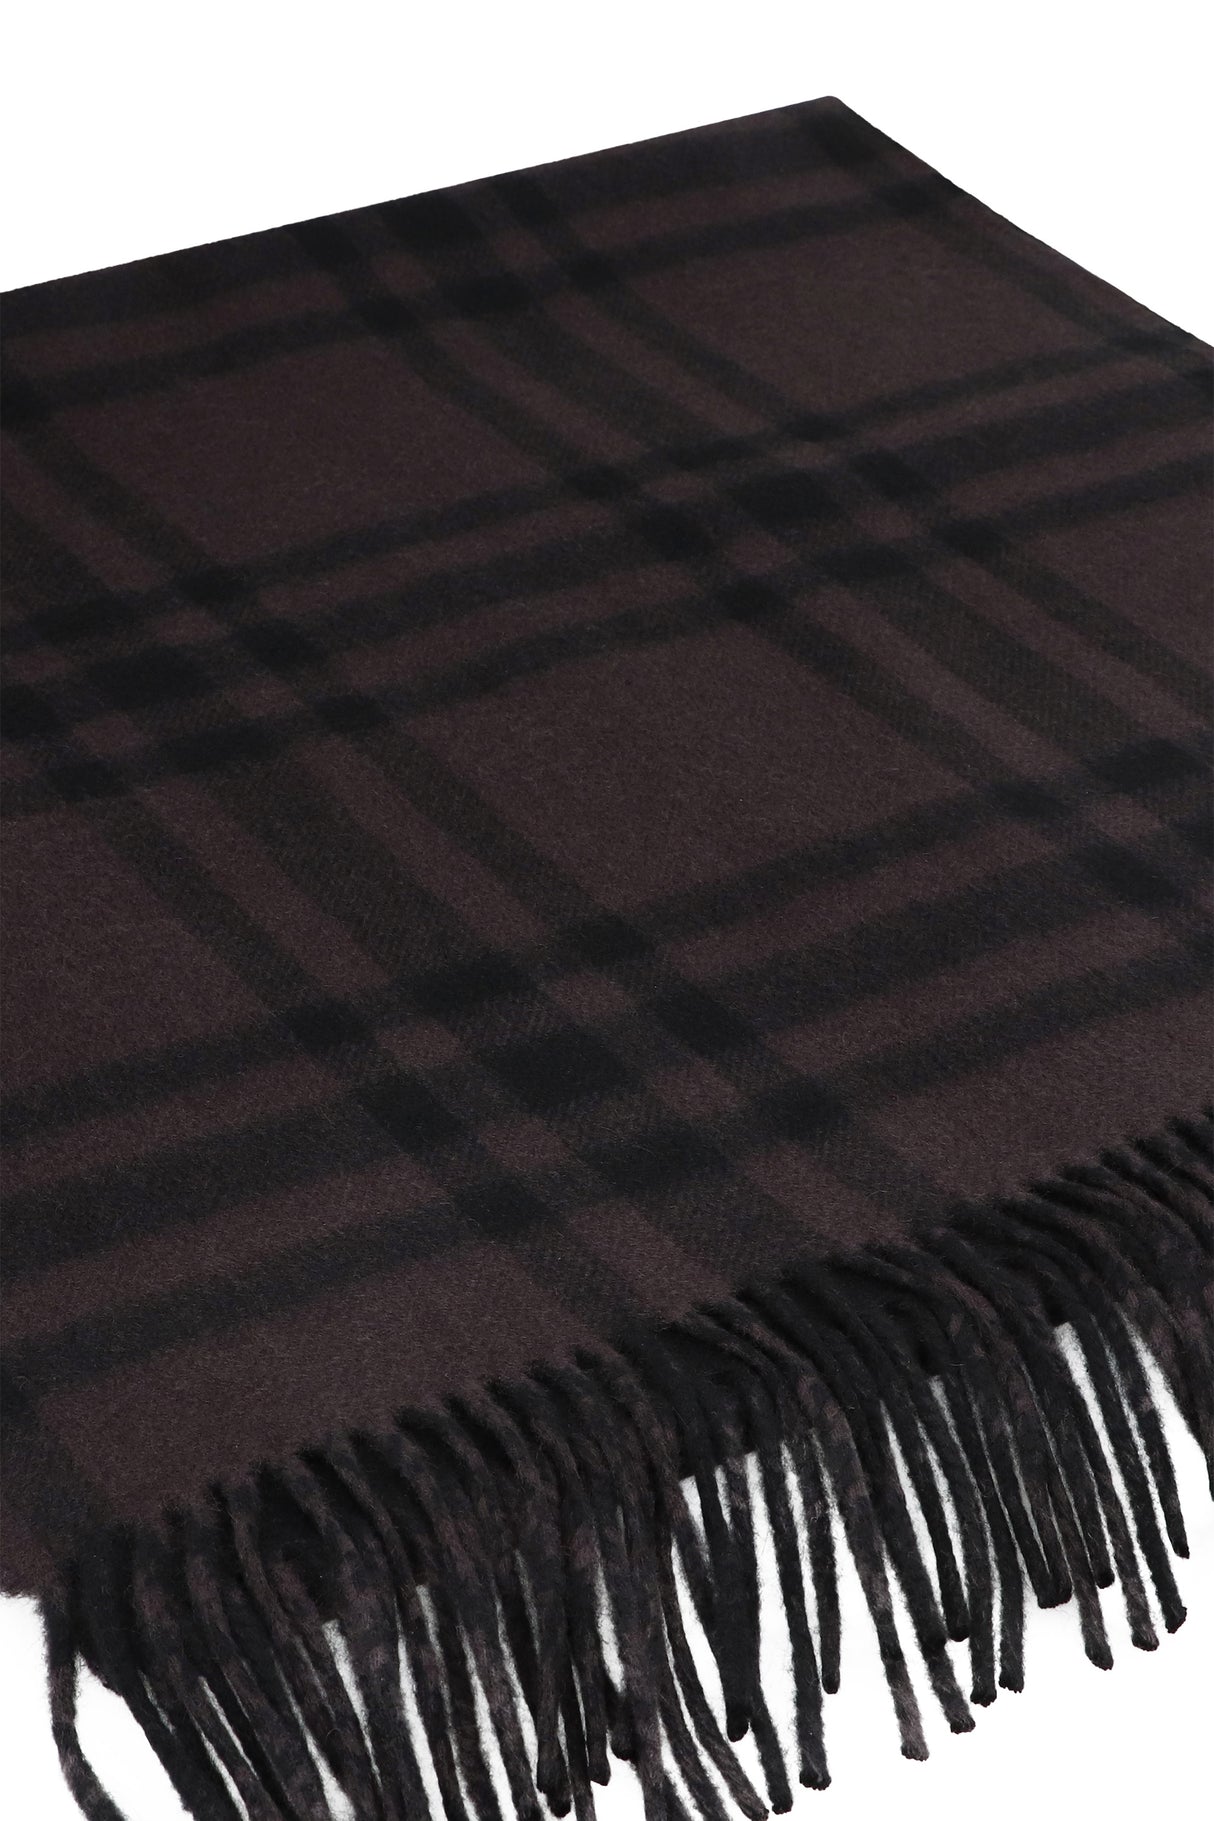 BURBERRY Grey Checkered Cashmere Scarf with Fringed Hemline - Size 210x50 cm